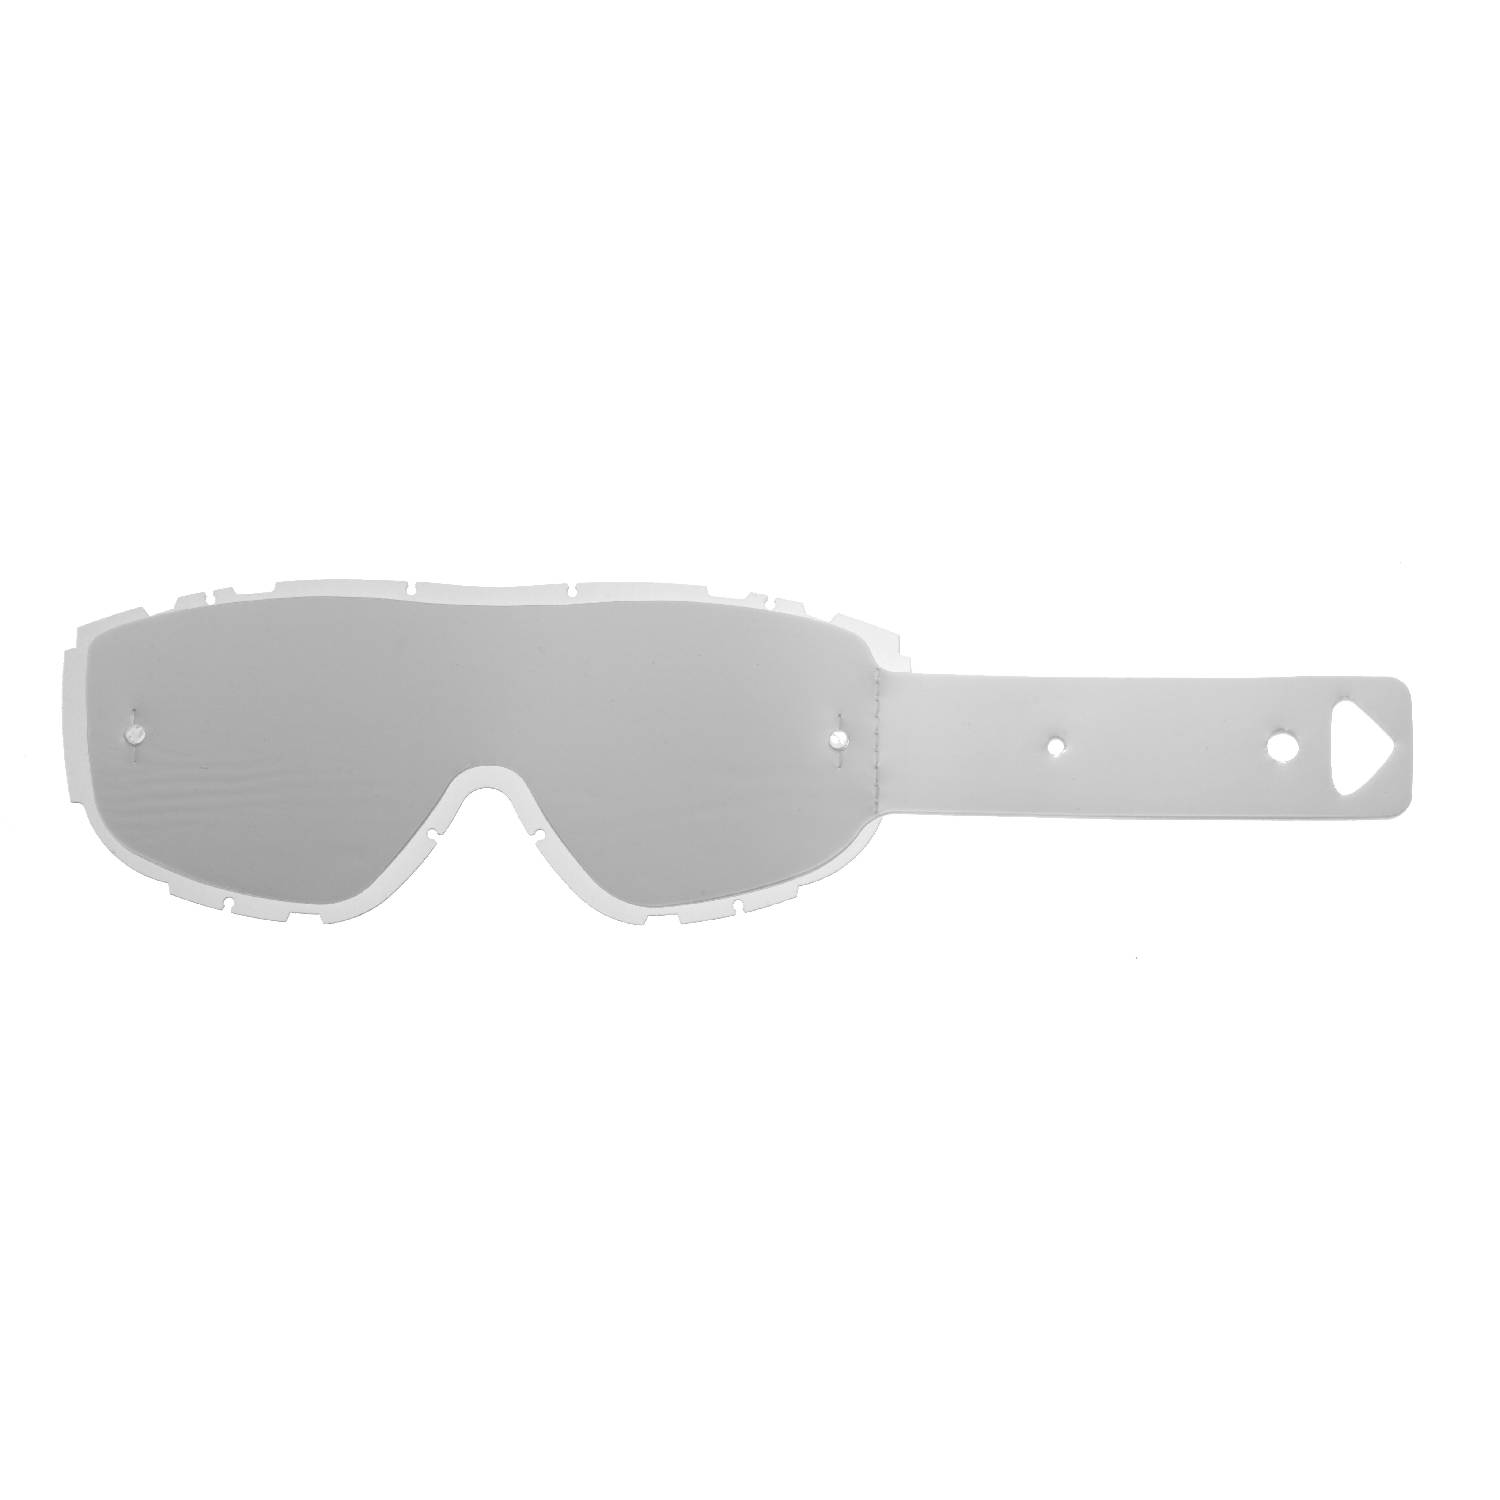 combo lenses with clear lenses with 10 tear off compatible for Smith Piston goggle